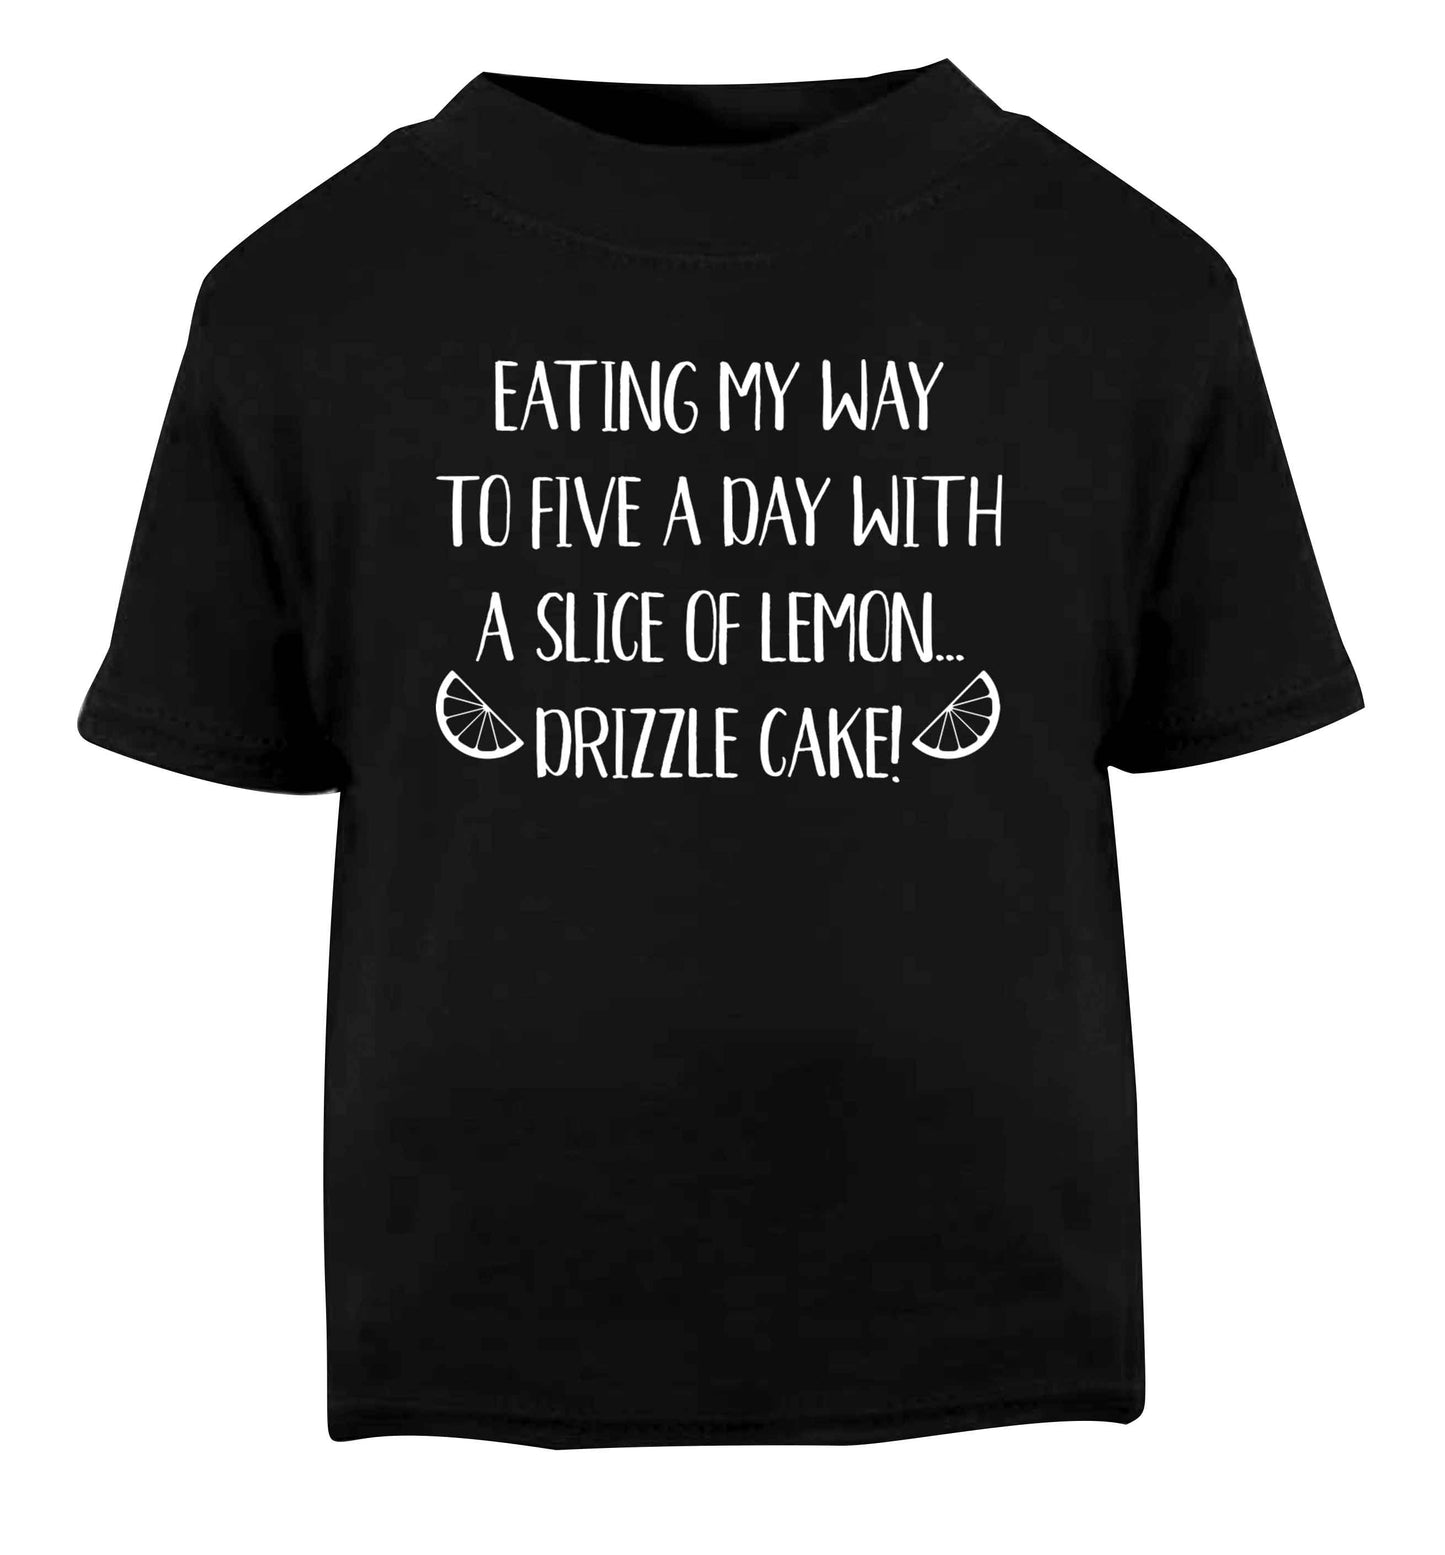 Eating my way to five a day with a slice of lemon drizzle cake day Black Baby Toddler Tshirt 2 years